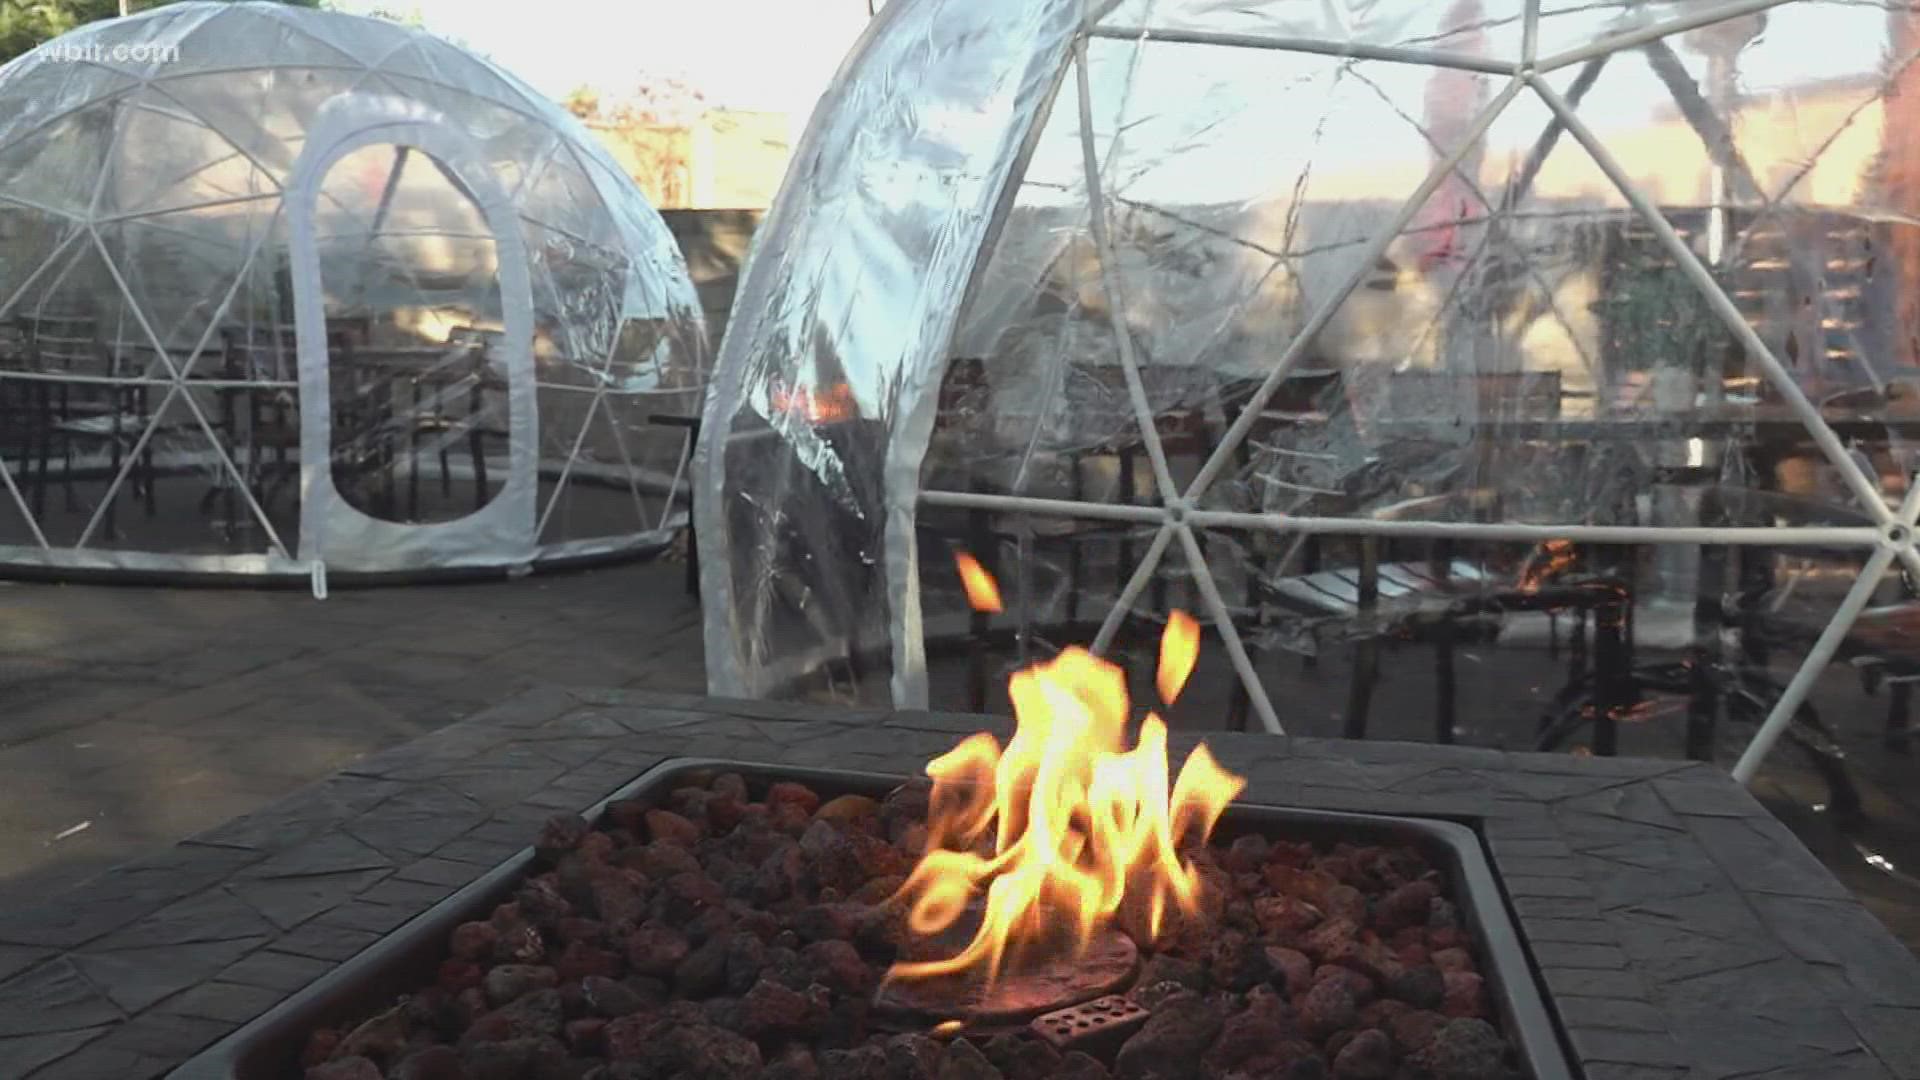 Restaurant owners say the new igloos help provide new options for outdoor dining.